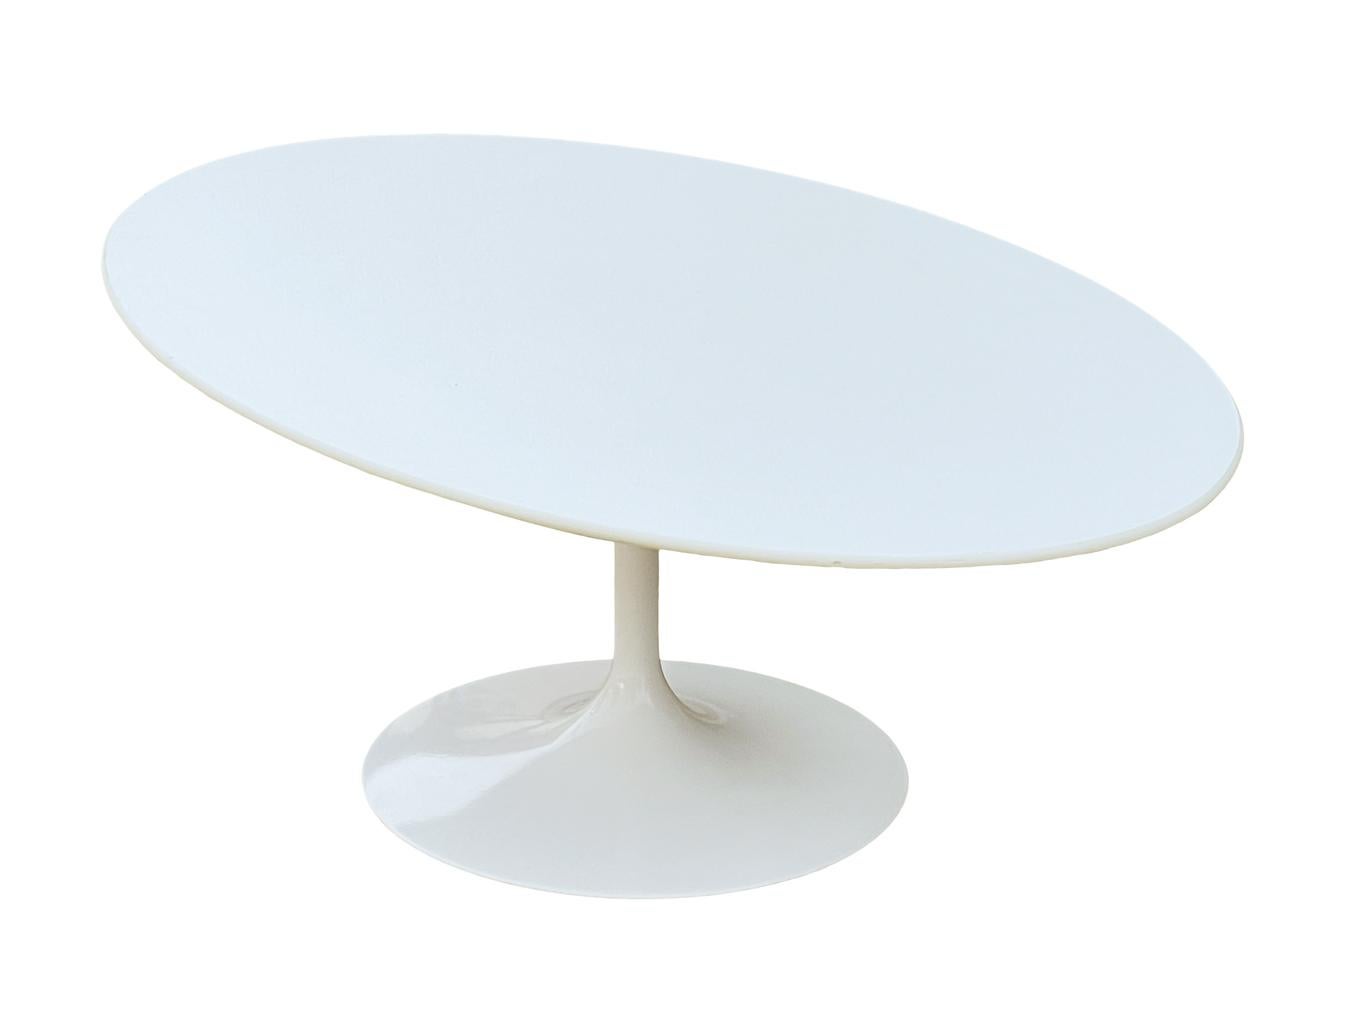 An iconic classic designed by Eero Saarinen and produced by Knoll. It features a white top with white base. Excellent overall condition. Manufactures stamp.